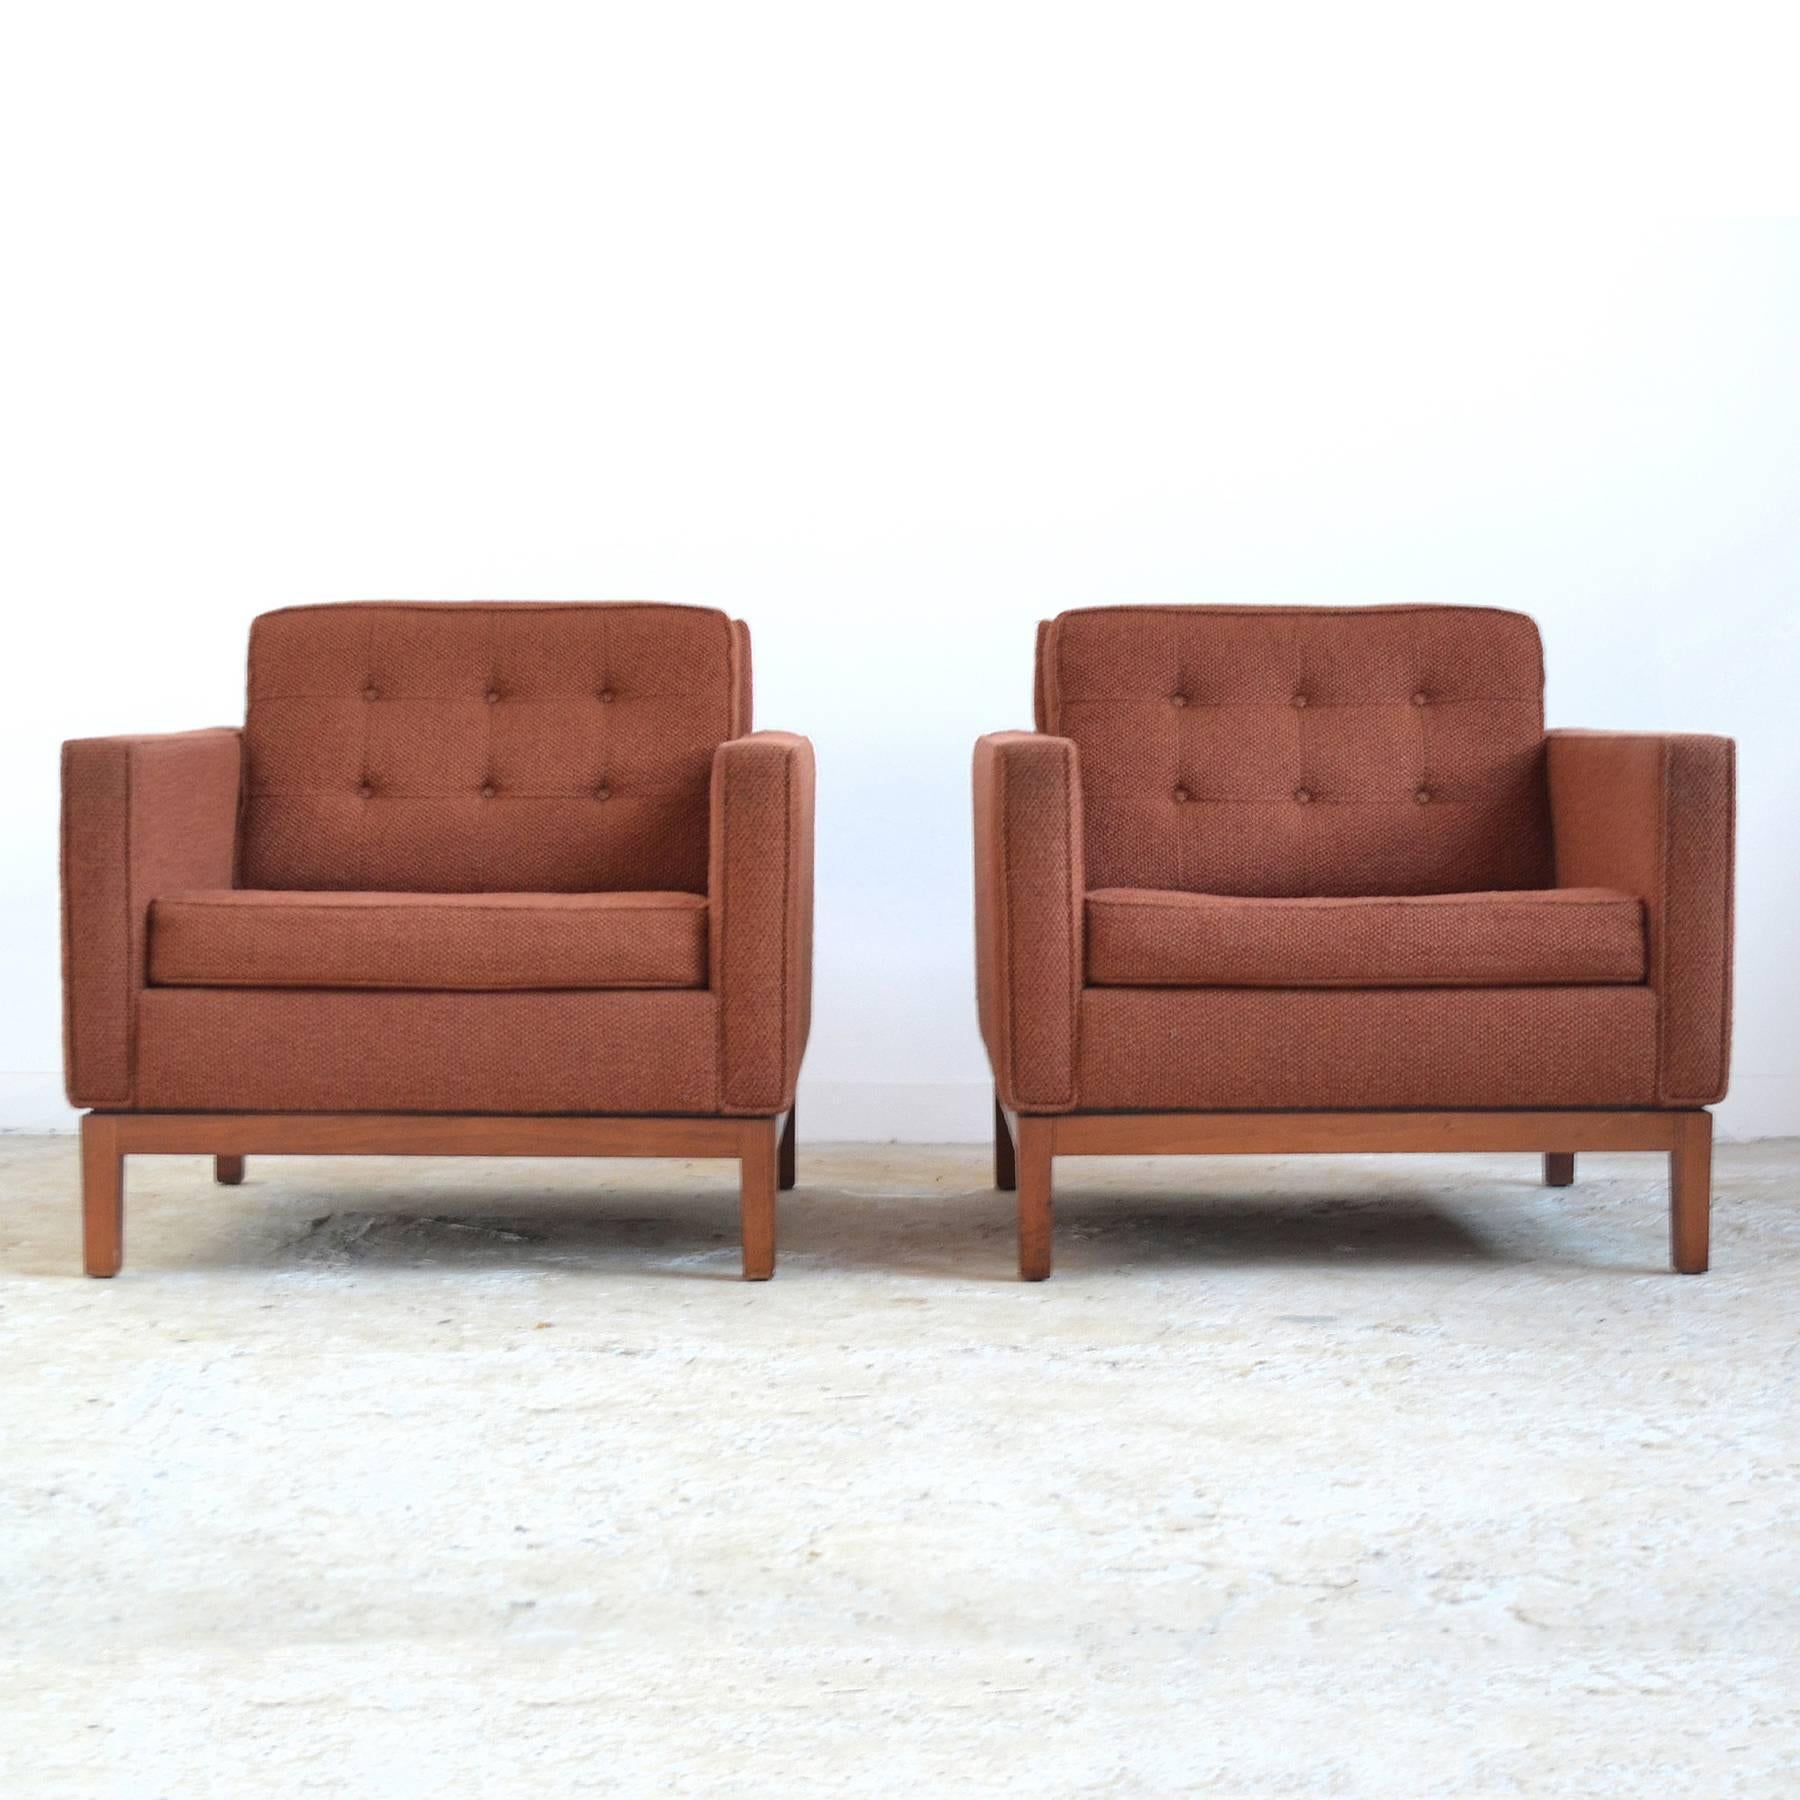 These handsome lounge chairs by Steelcase clearly takes their design cues from Florence Knoll's famous 